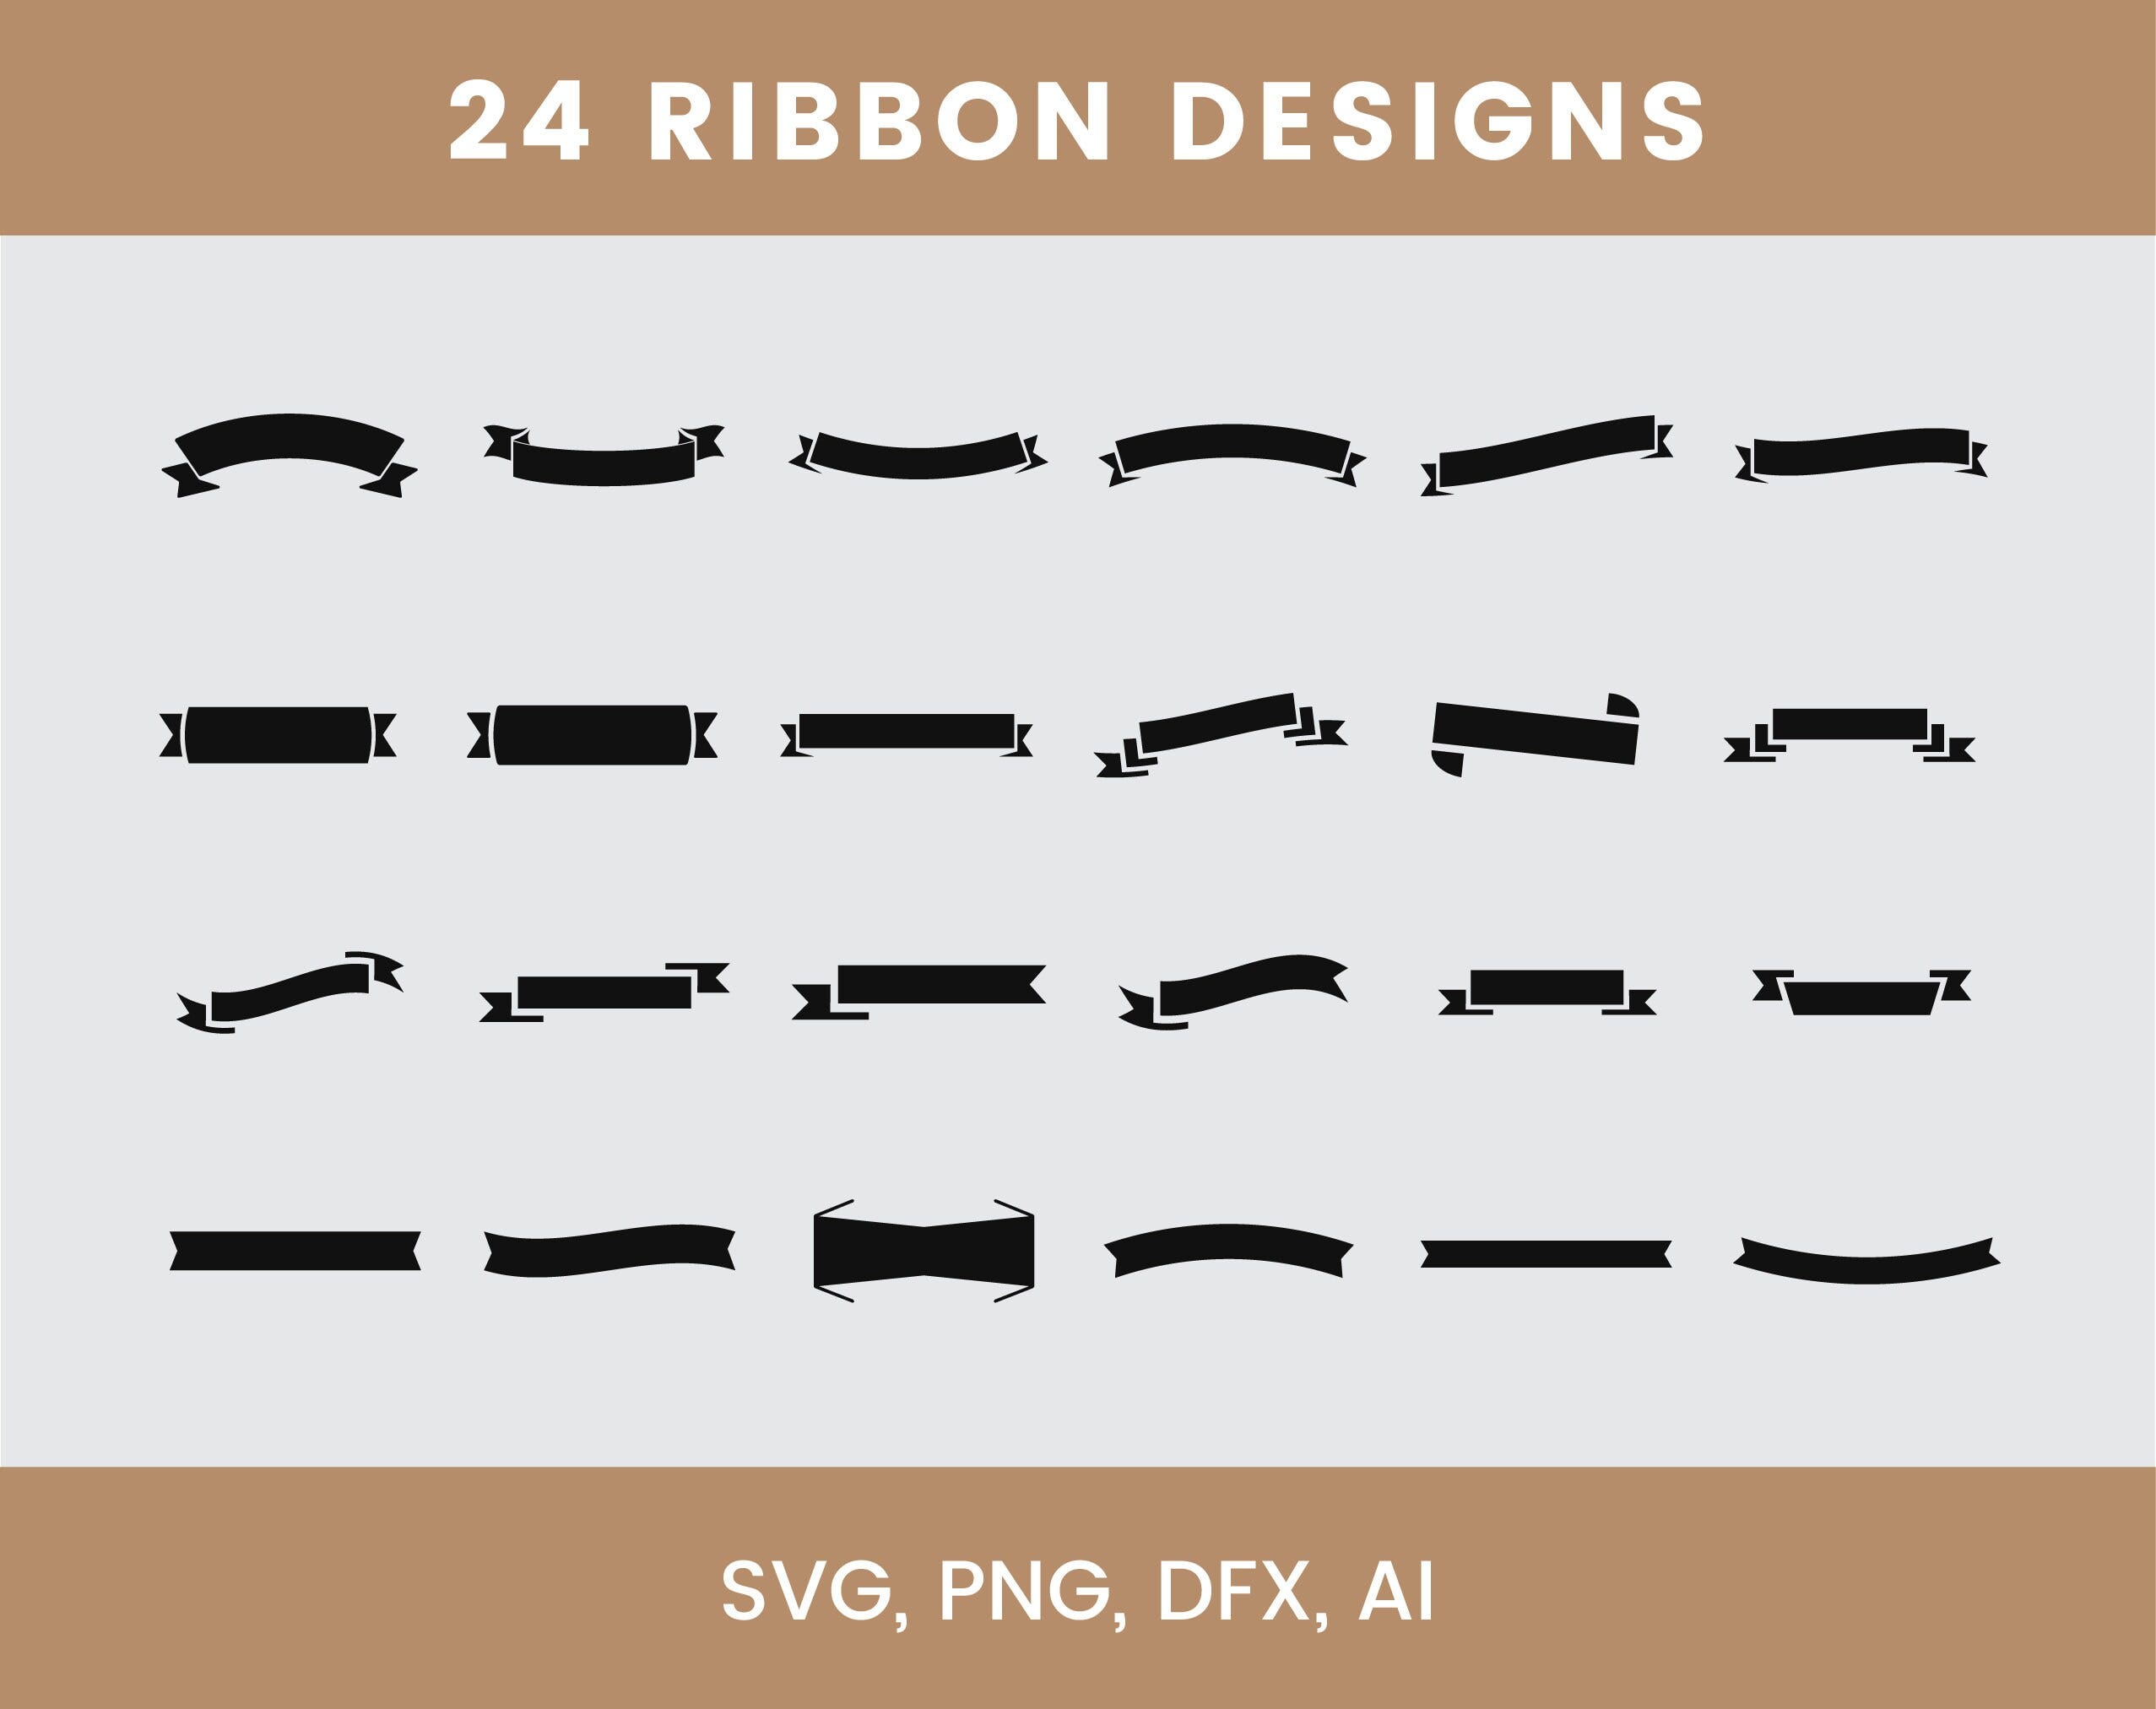 24 Ribbons Svg / Vector badges svg / Files for Cricut / Cut Files / Silhouette / Clipart / Vector